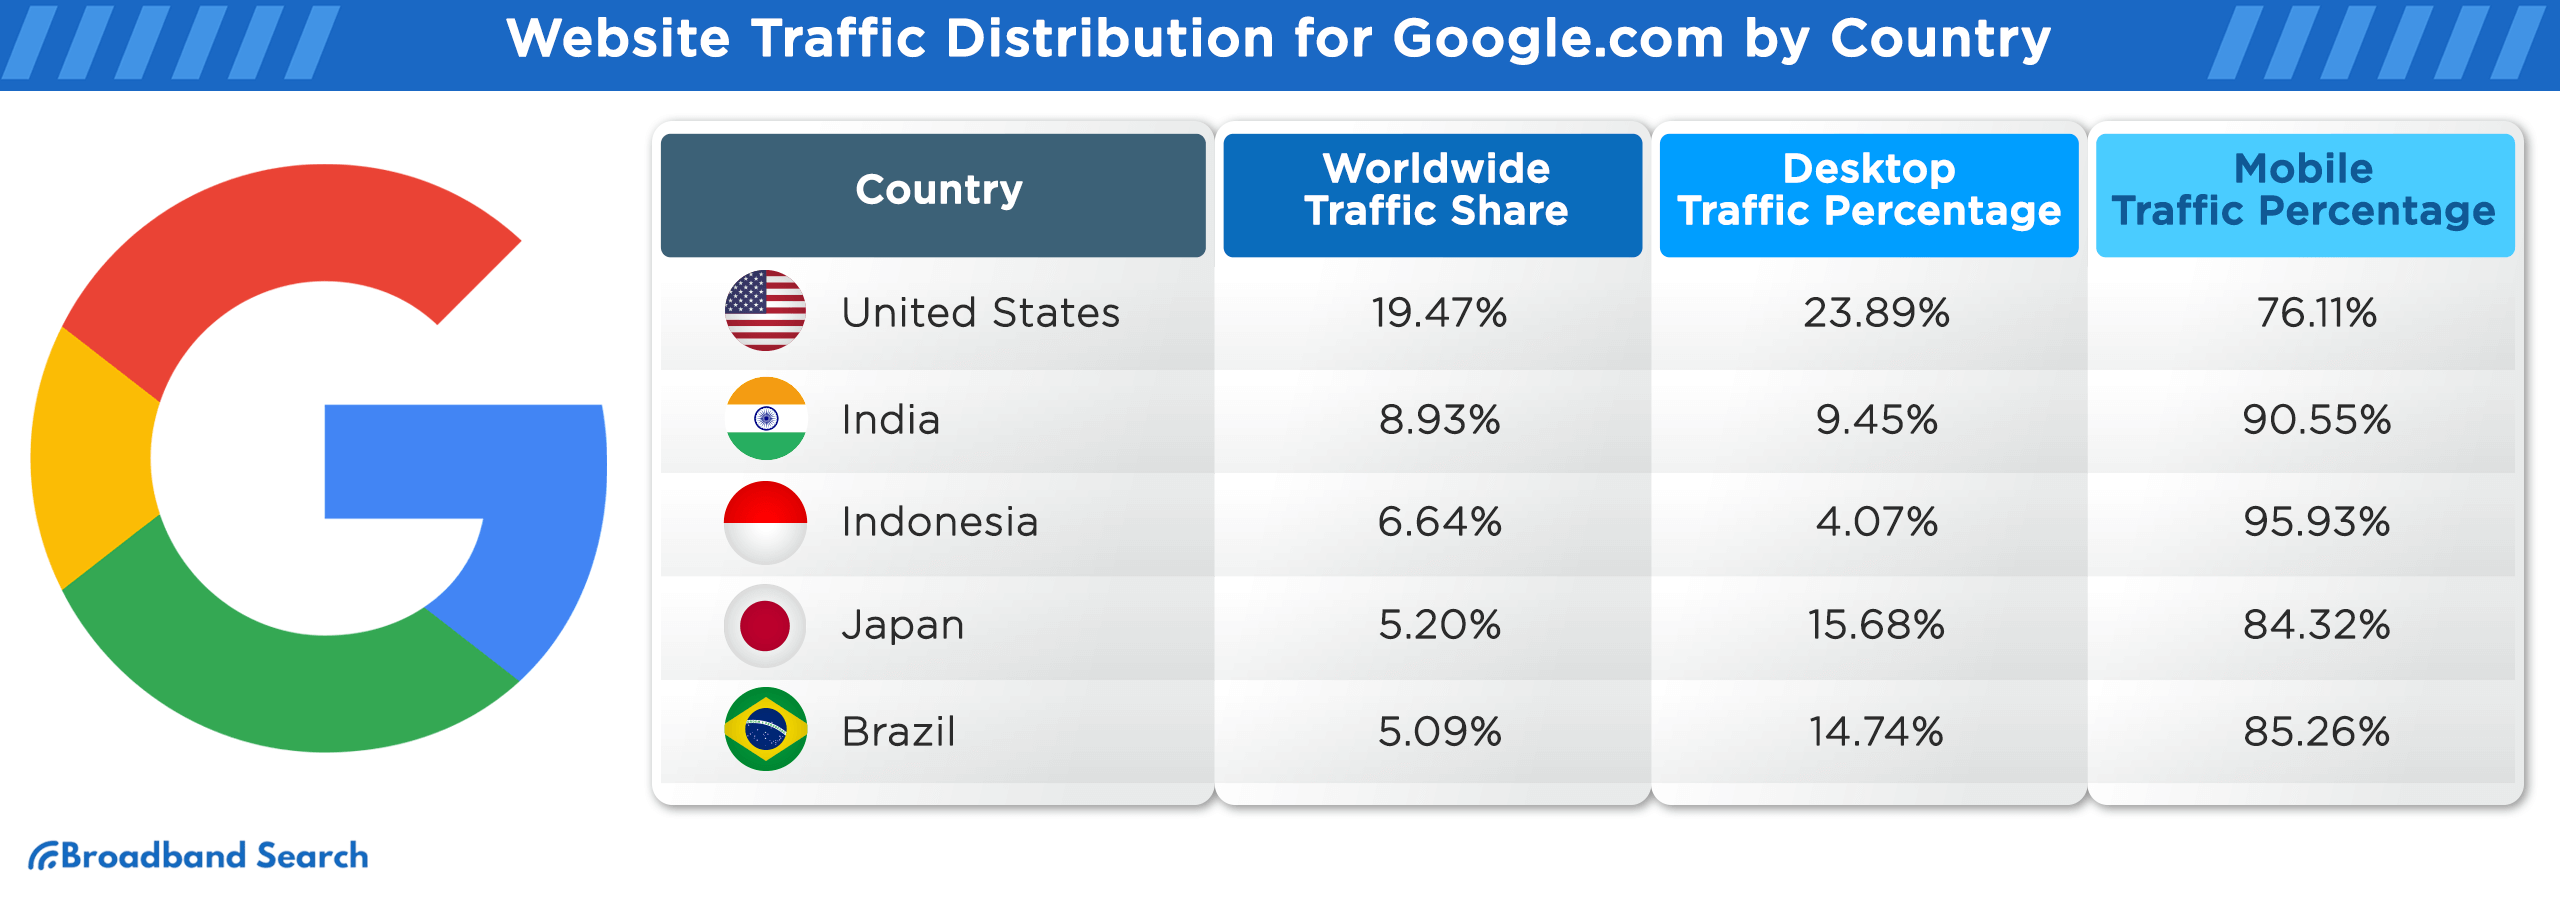 Website traffic distribution for google.com by country